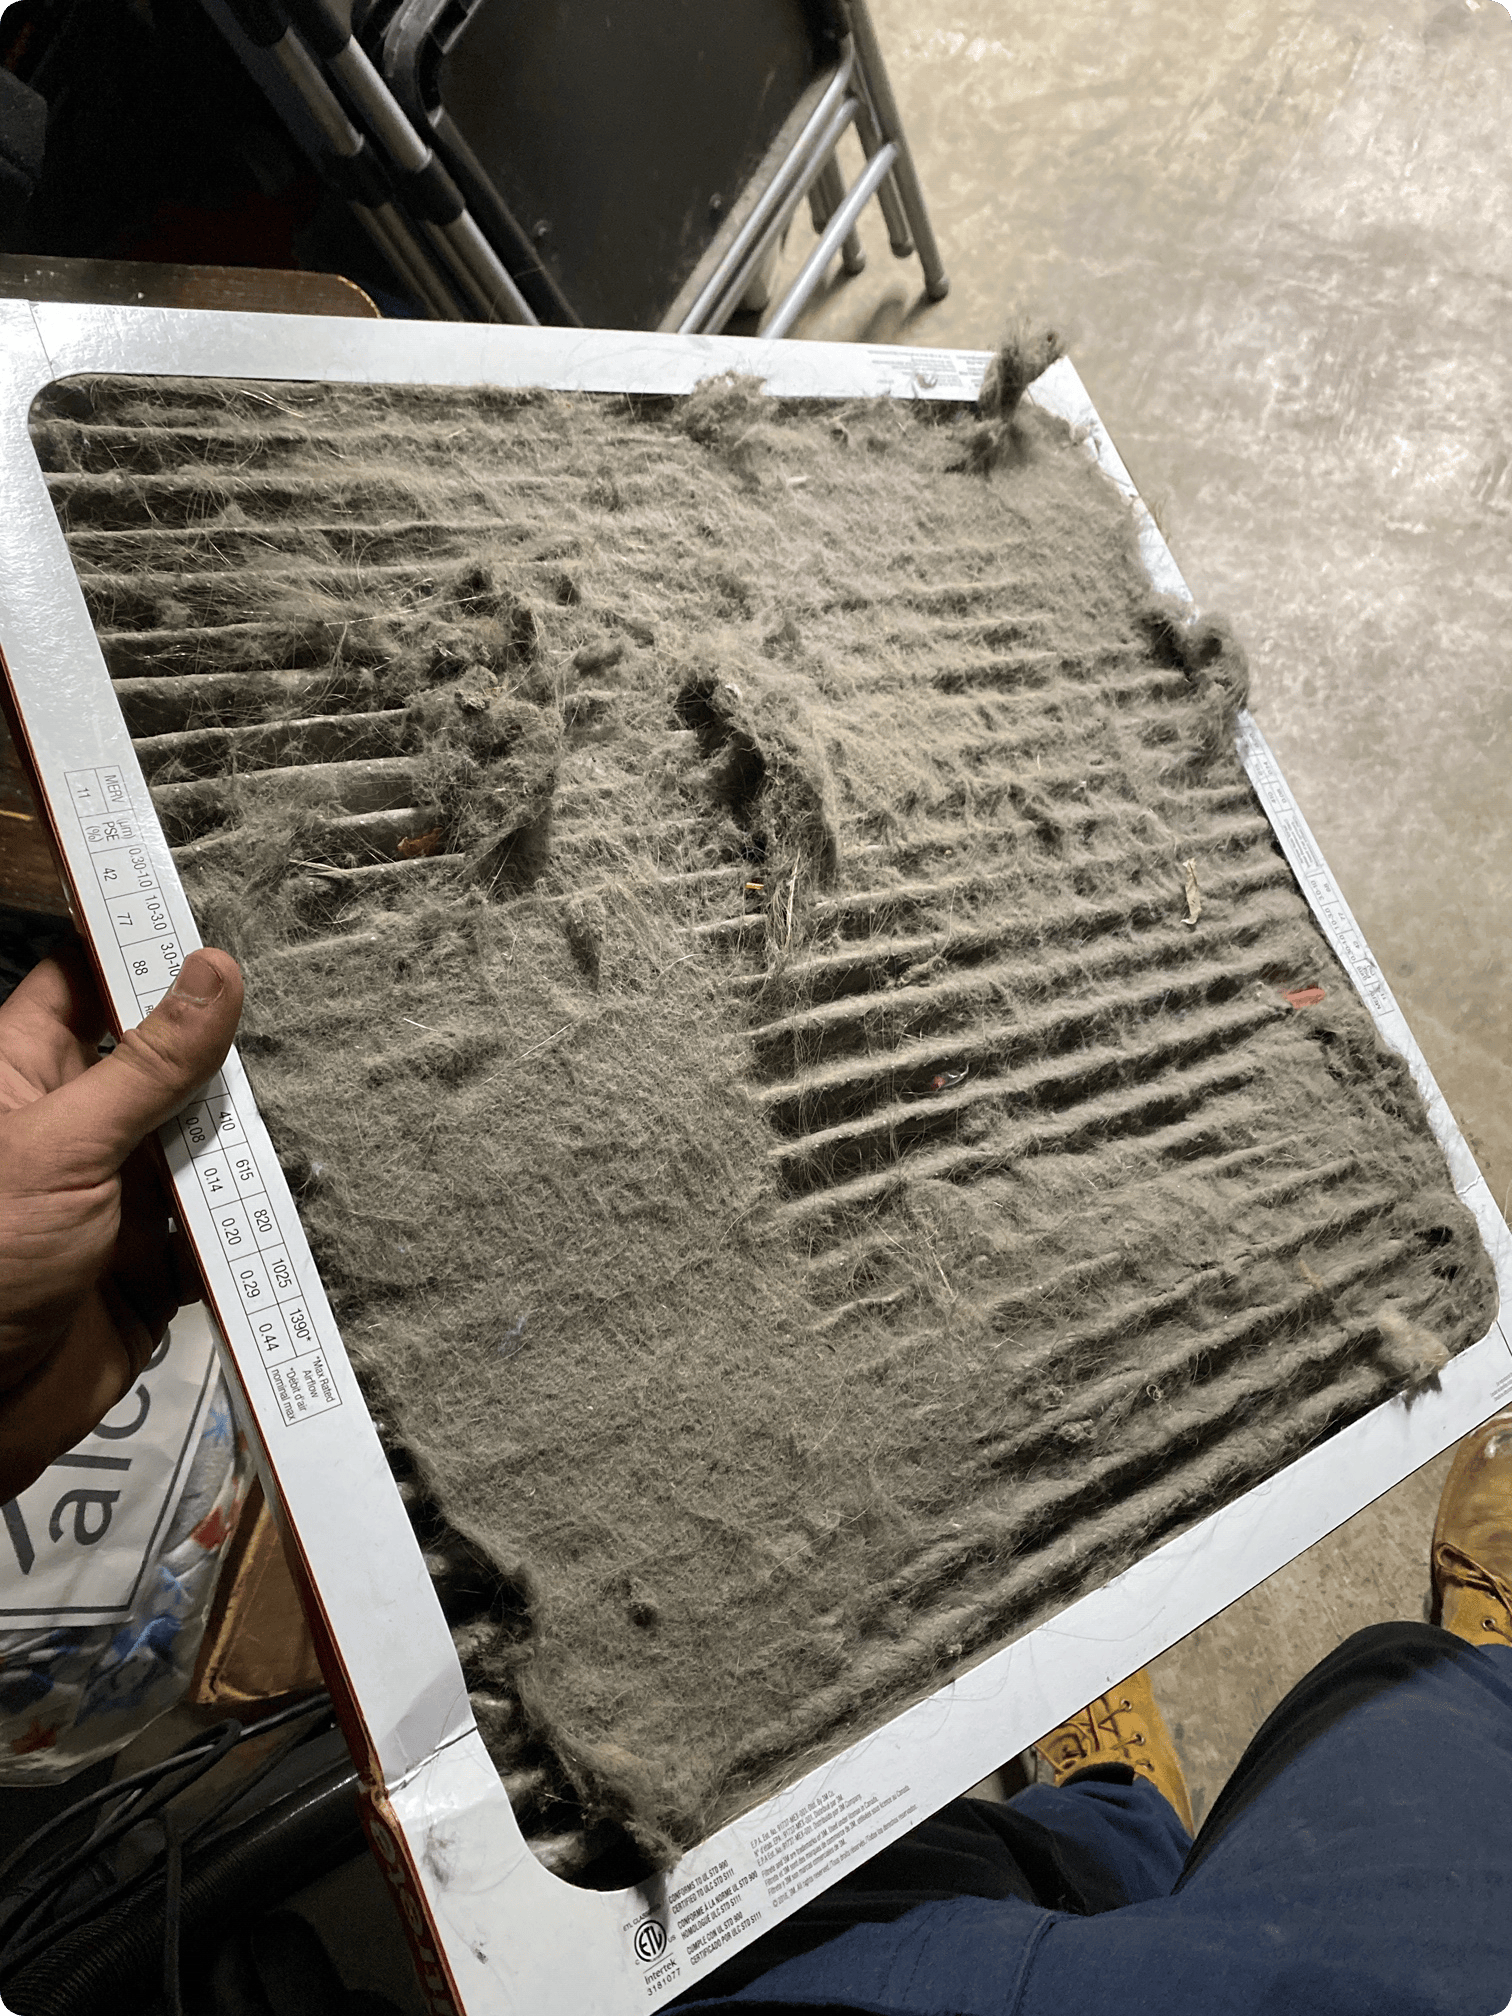 How To Change An Aprilaire Air Filter